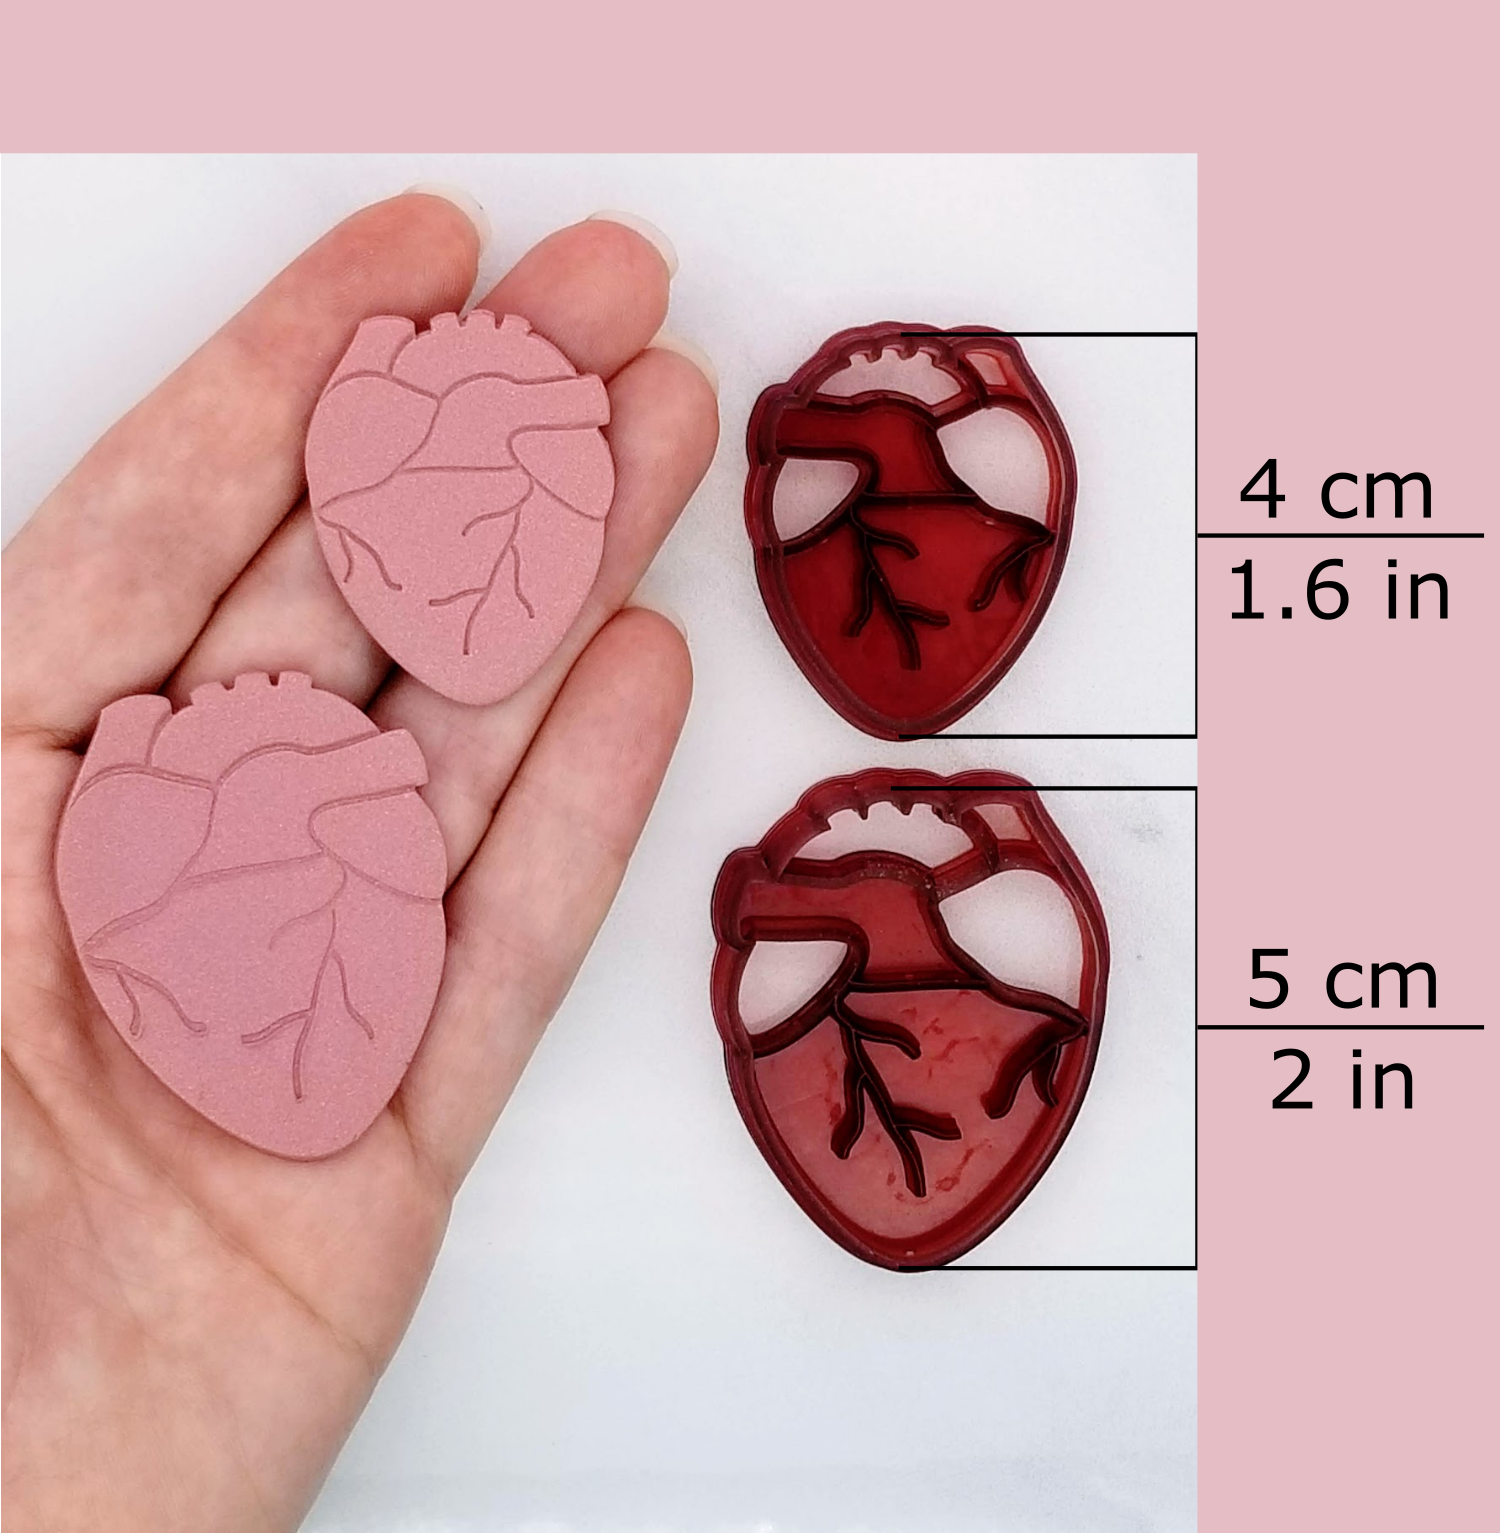 Anatomical heart clay cutter available sizes and sample finish product on polymer clay. Sizes: 4 centimeters / 1.6 inches, and 5 centimeters / 2 inches